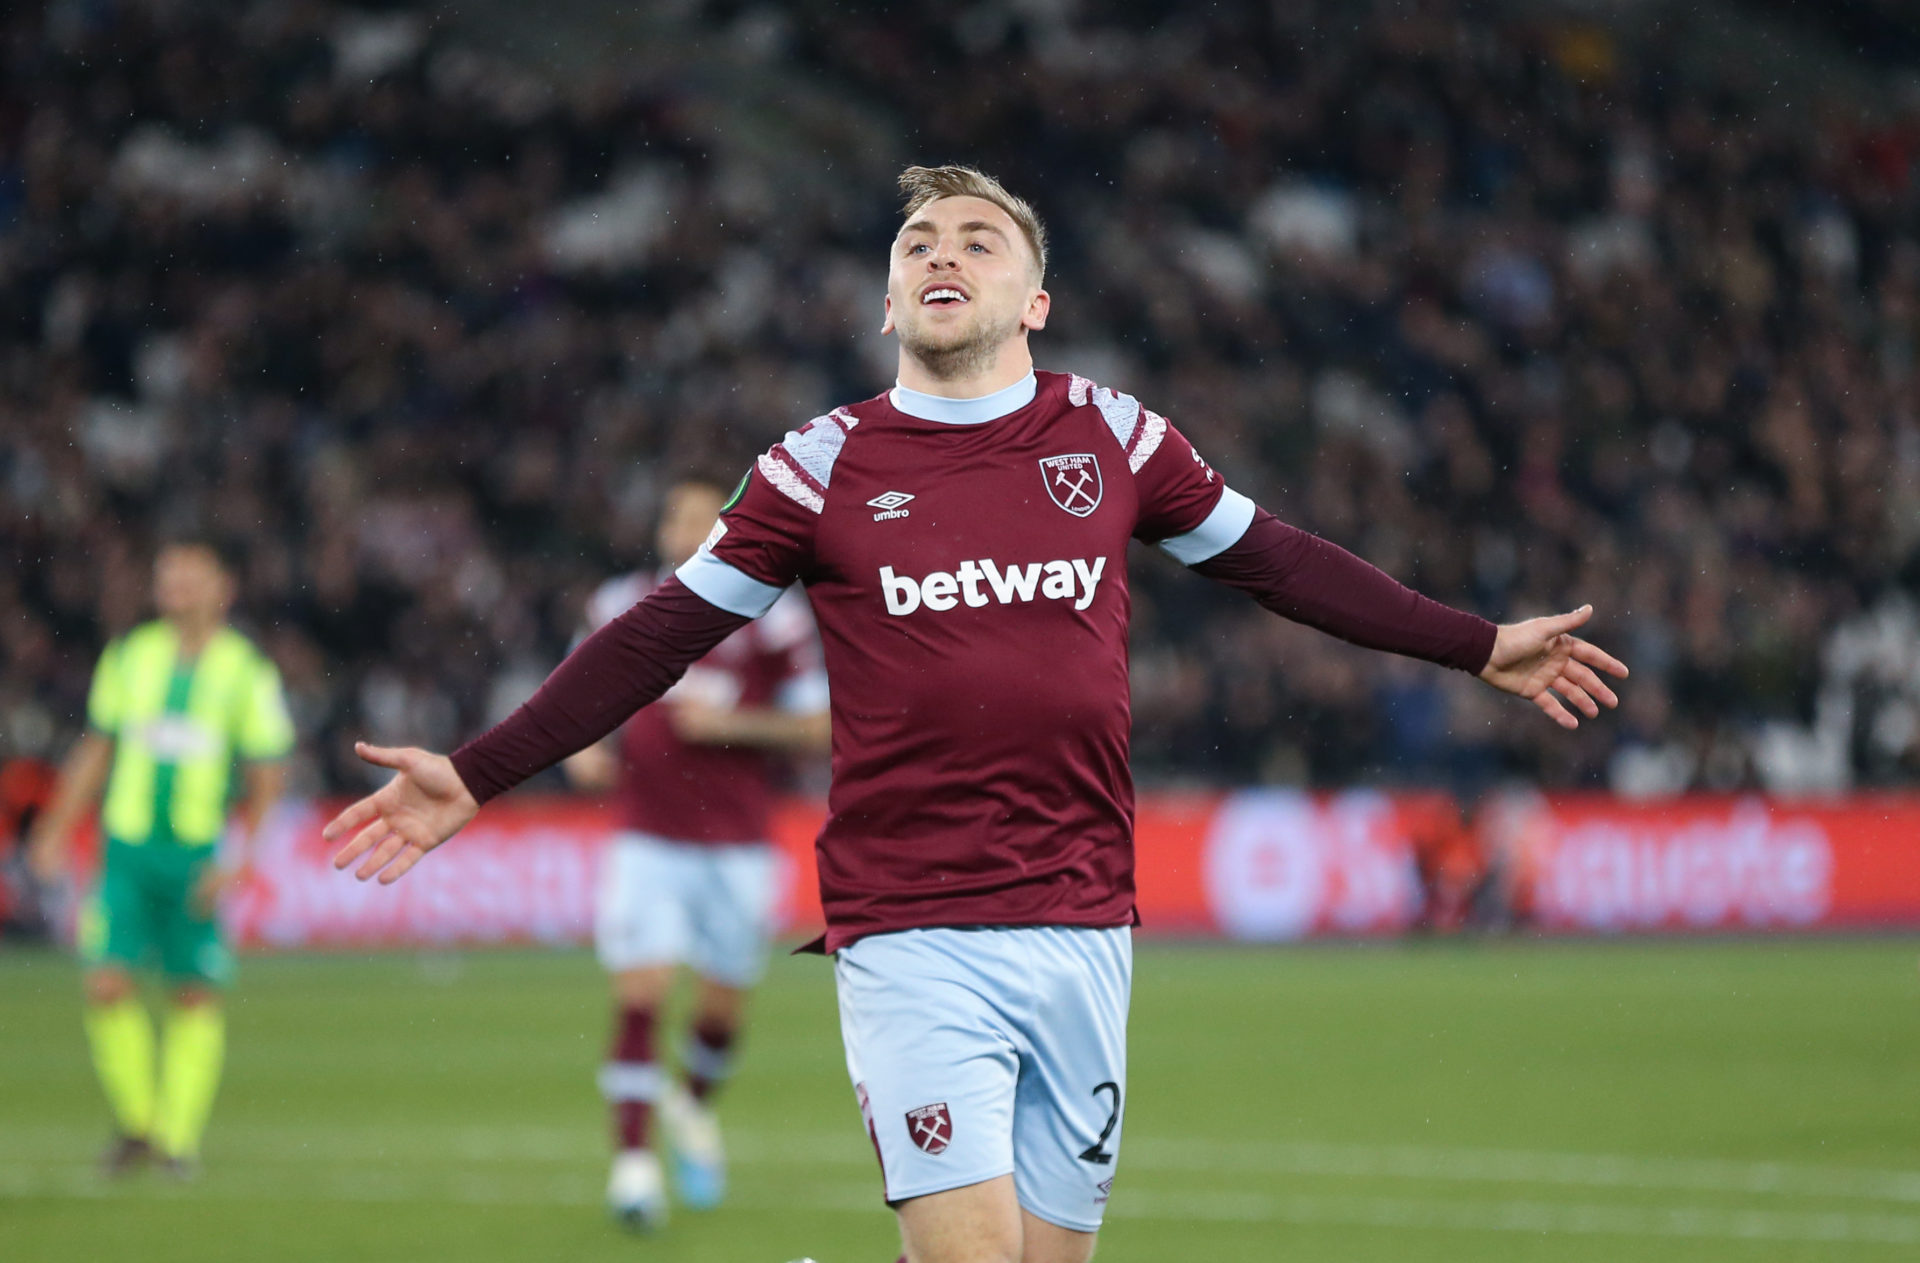 26-yo Hammer ‘loves’ West Ham but he reportedly could leave this summer with bids expected.